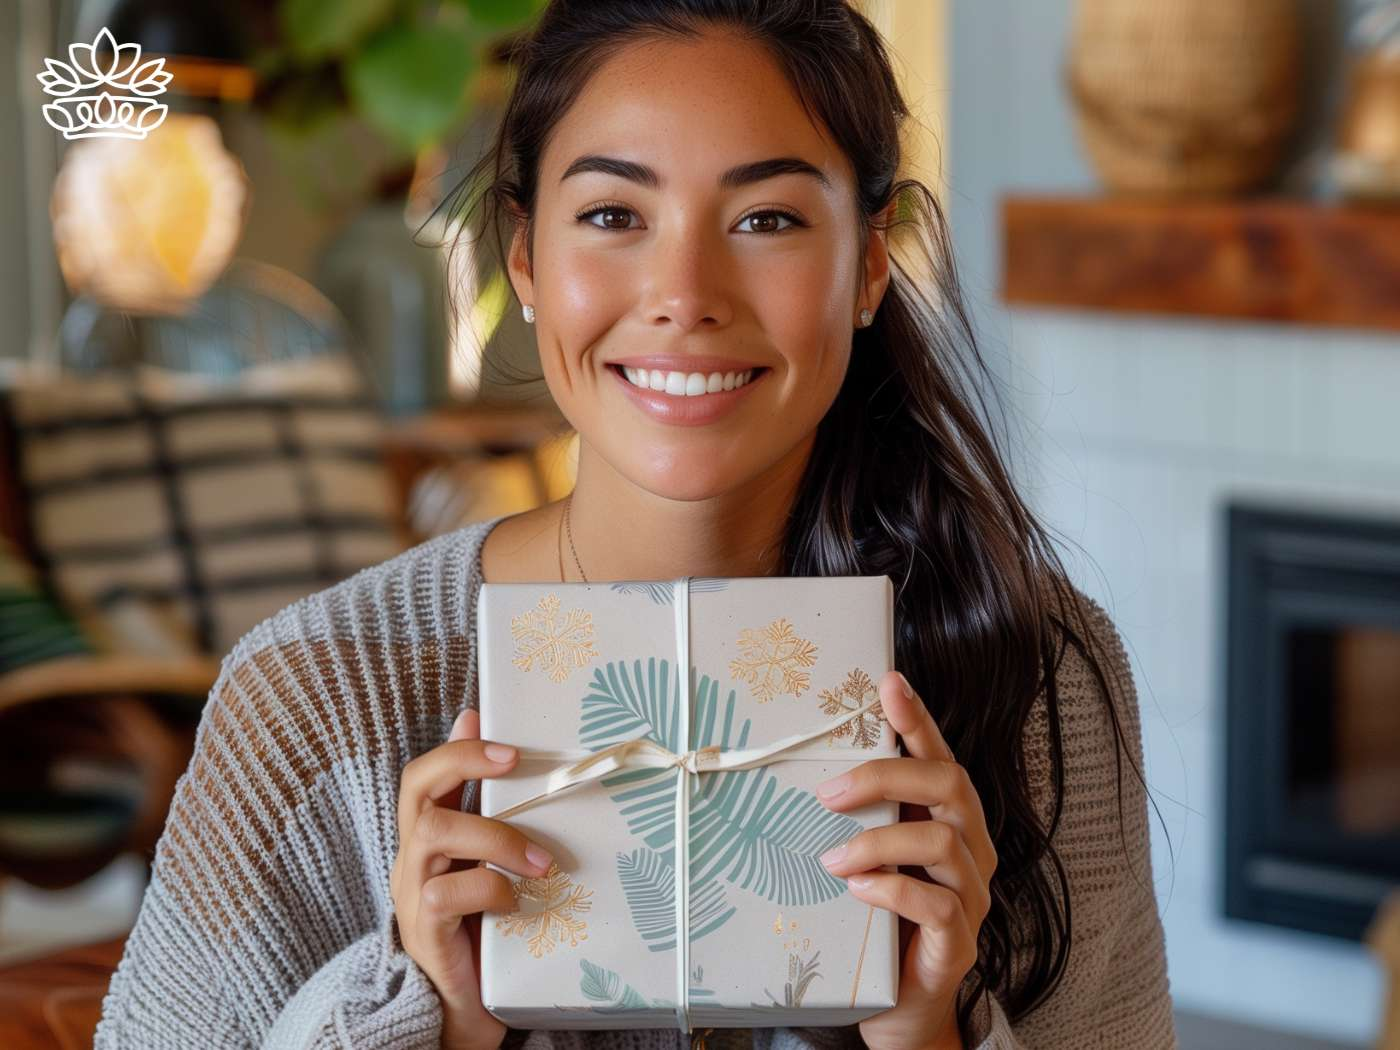 Radiant young woman presenting a beautifully patterned gift box from the 'All Gift Boxes' collection, capturing a moment of joy, courtesy of Fabulous Flowers and Gifts."